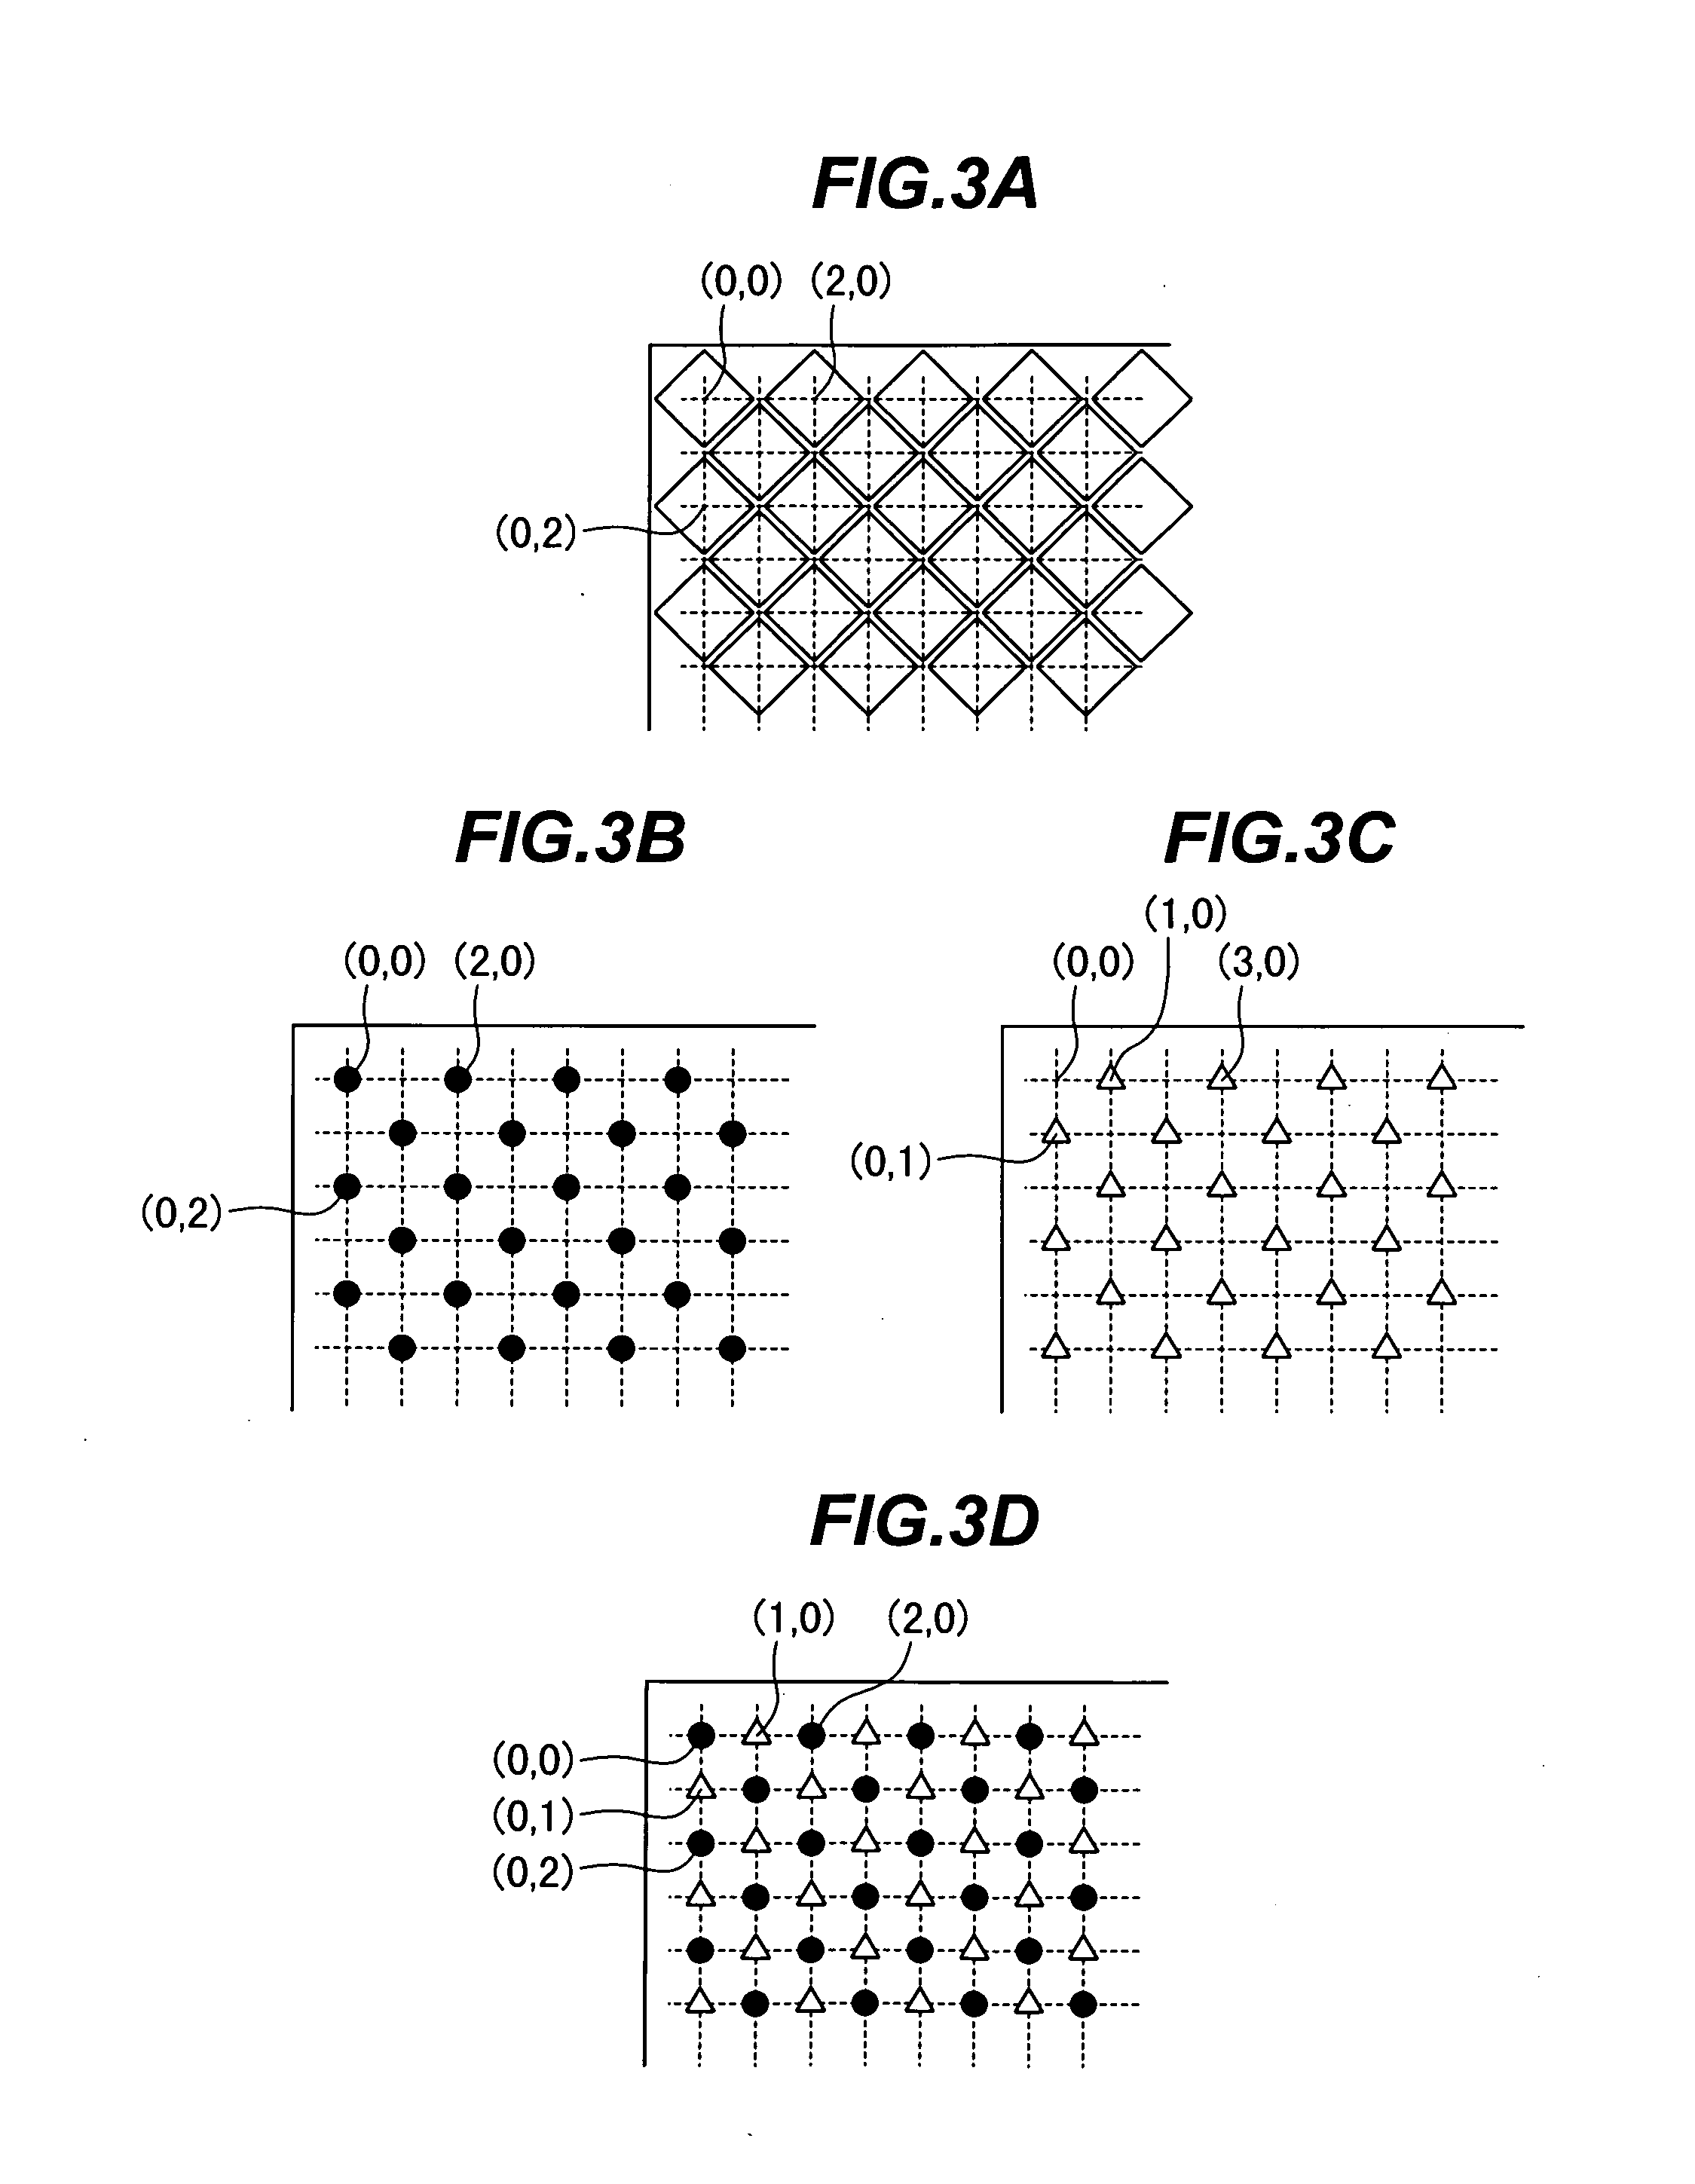 Image display apparatus and method, and image generating apparatus and method